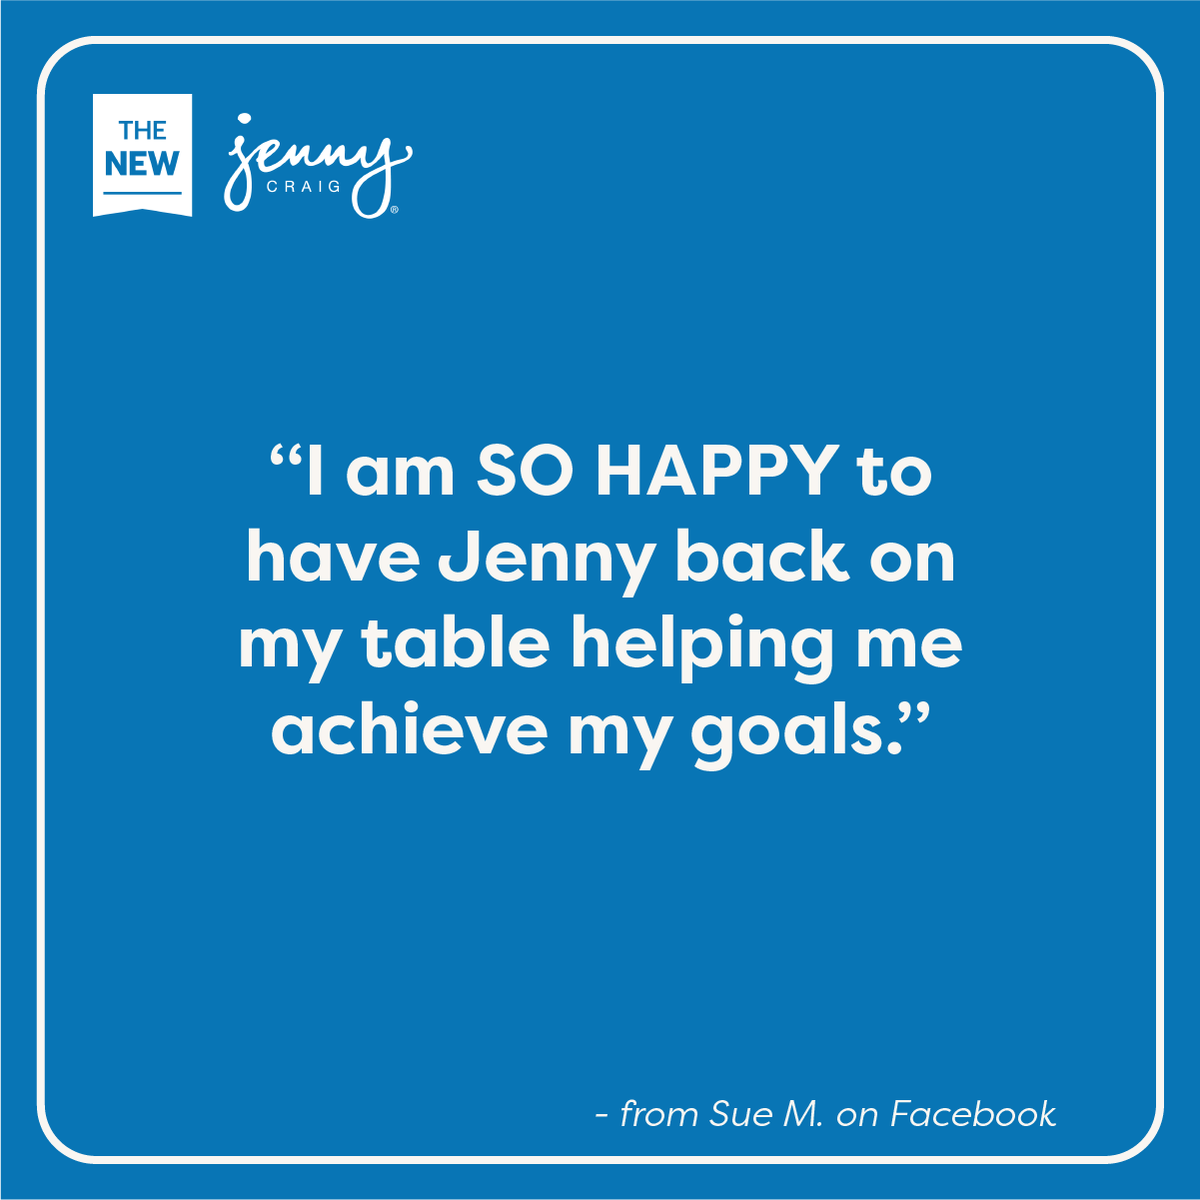 We’re SO happy to be a part of your journey! Order today & see what you can accomplish with Jenny. 🥰